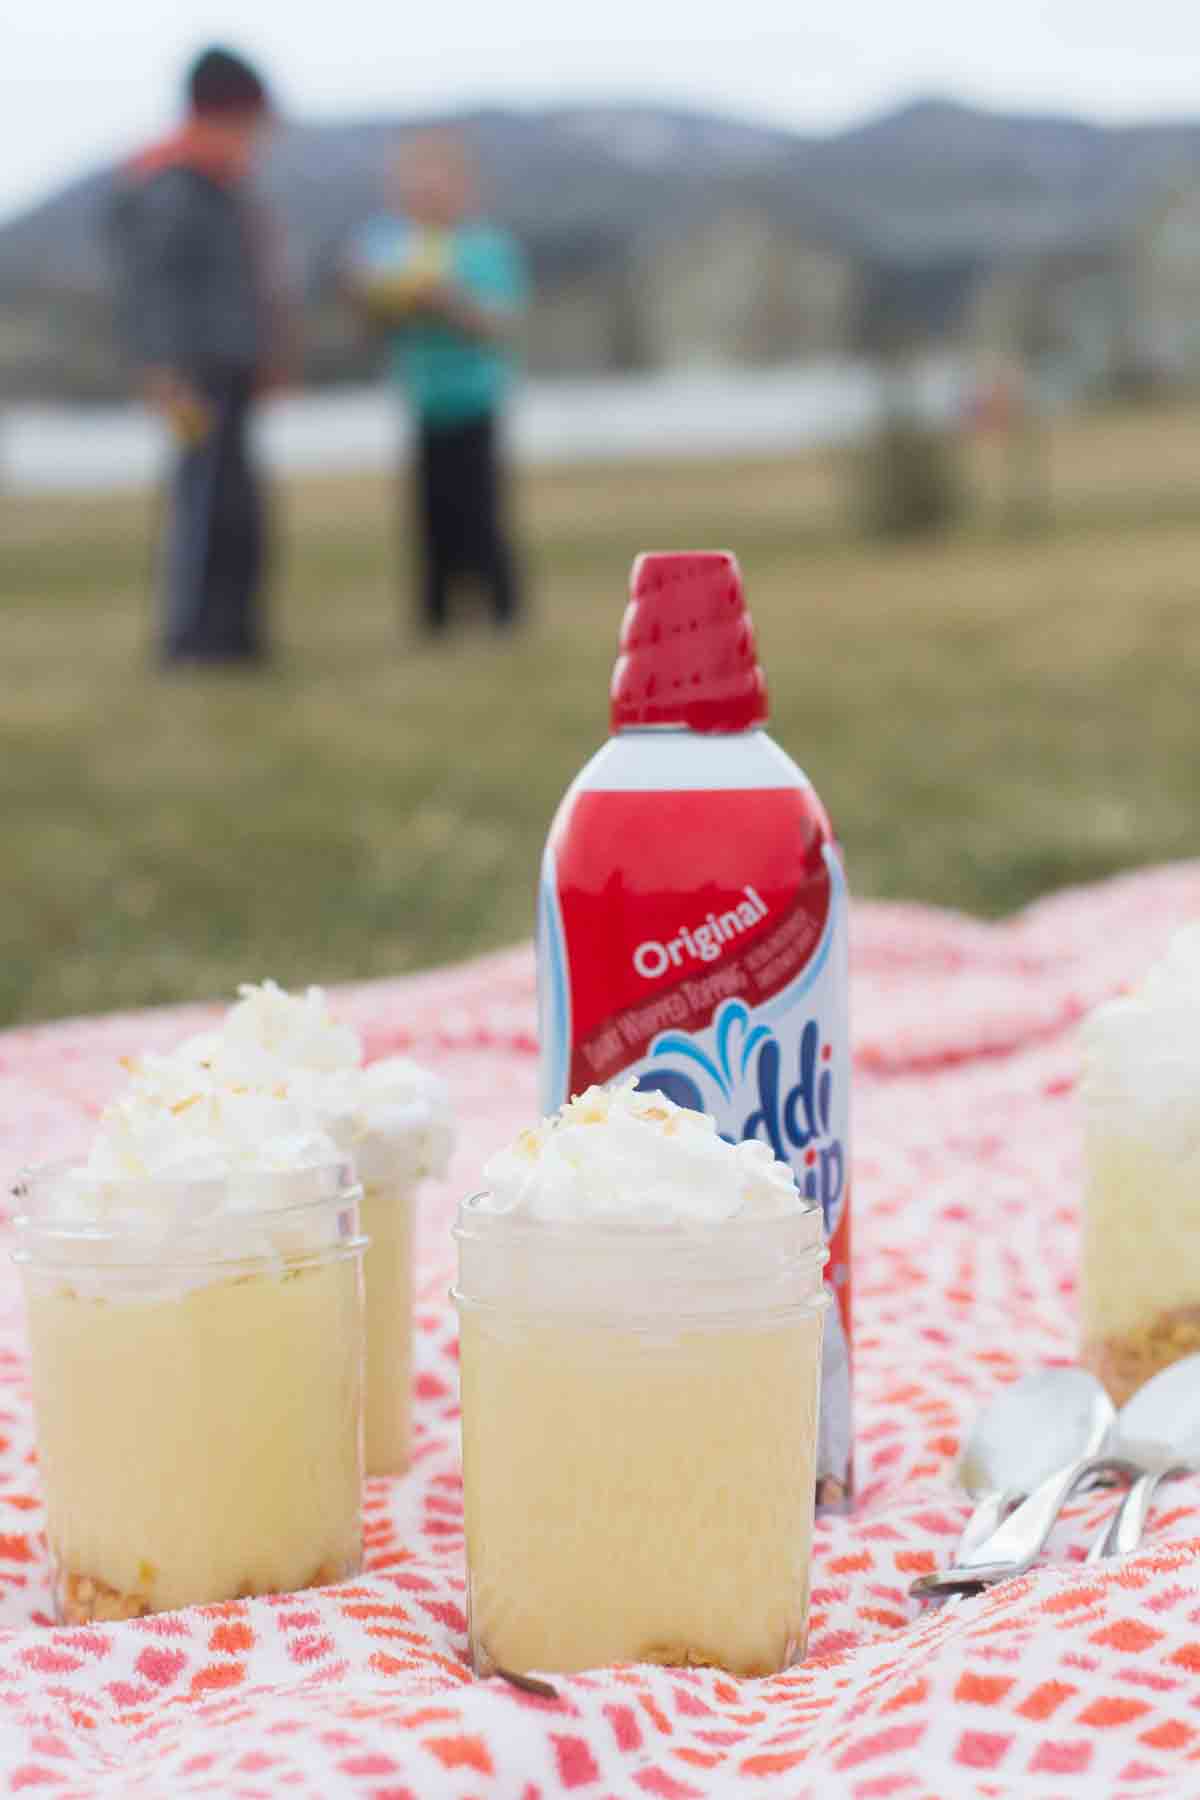 Jars of Coconut Lemon Pudding Parfait on a picnic blanket with a can of Reddi Wip.